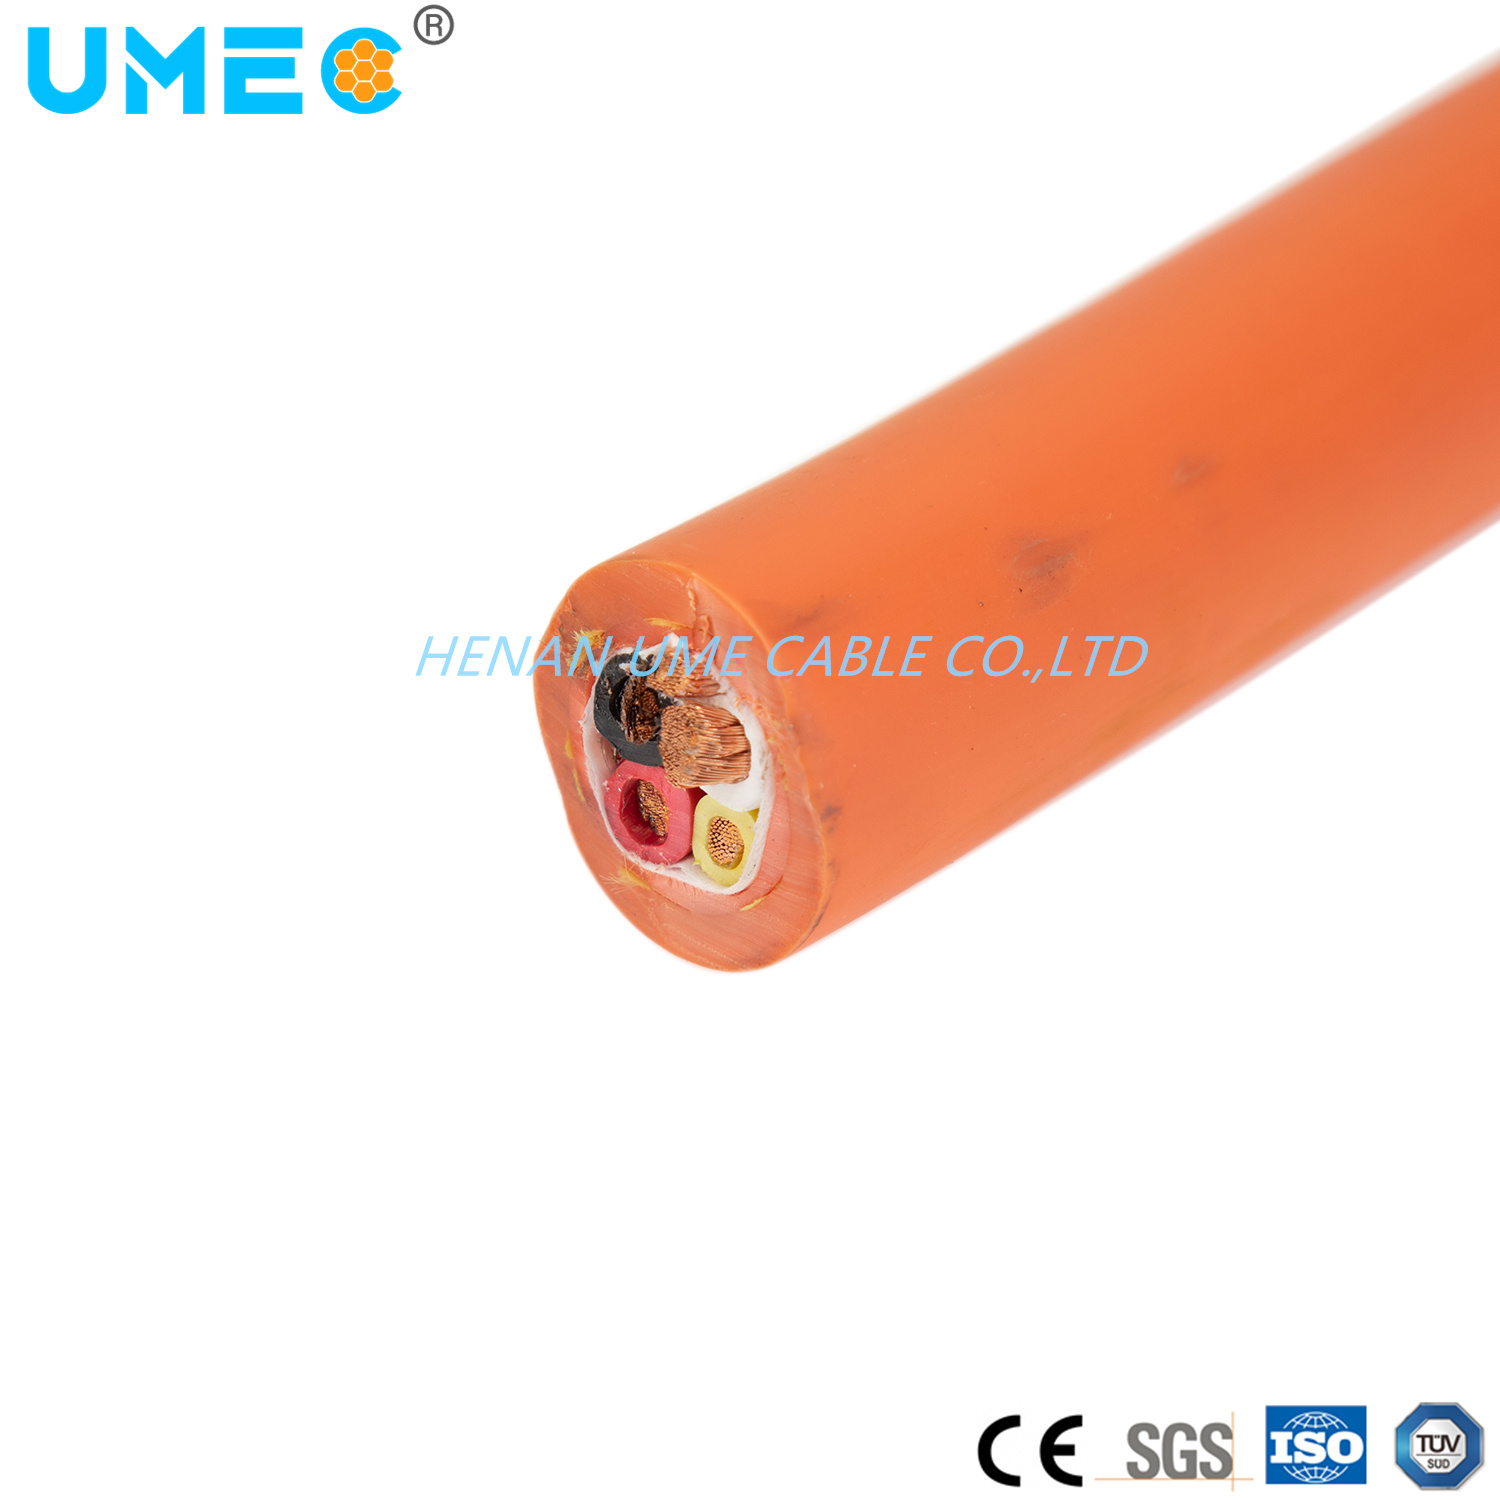 Black Yellow Grey Fire Resistant Power PVC/XLPE Flexible Cable 1.5mm2 Copper Conductor 450/750V Control Cable